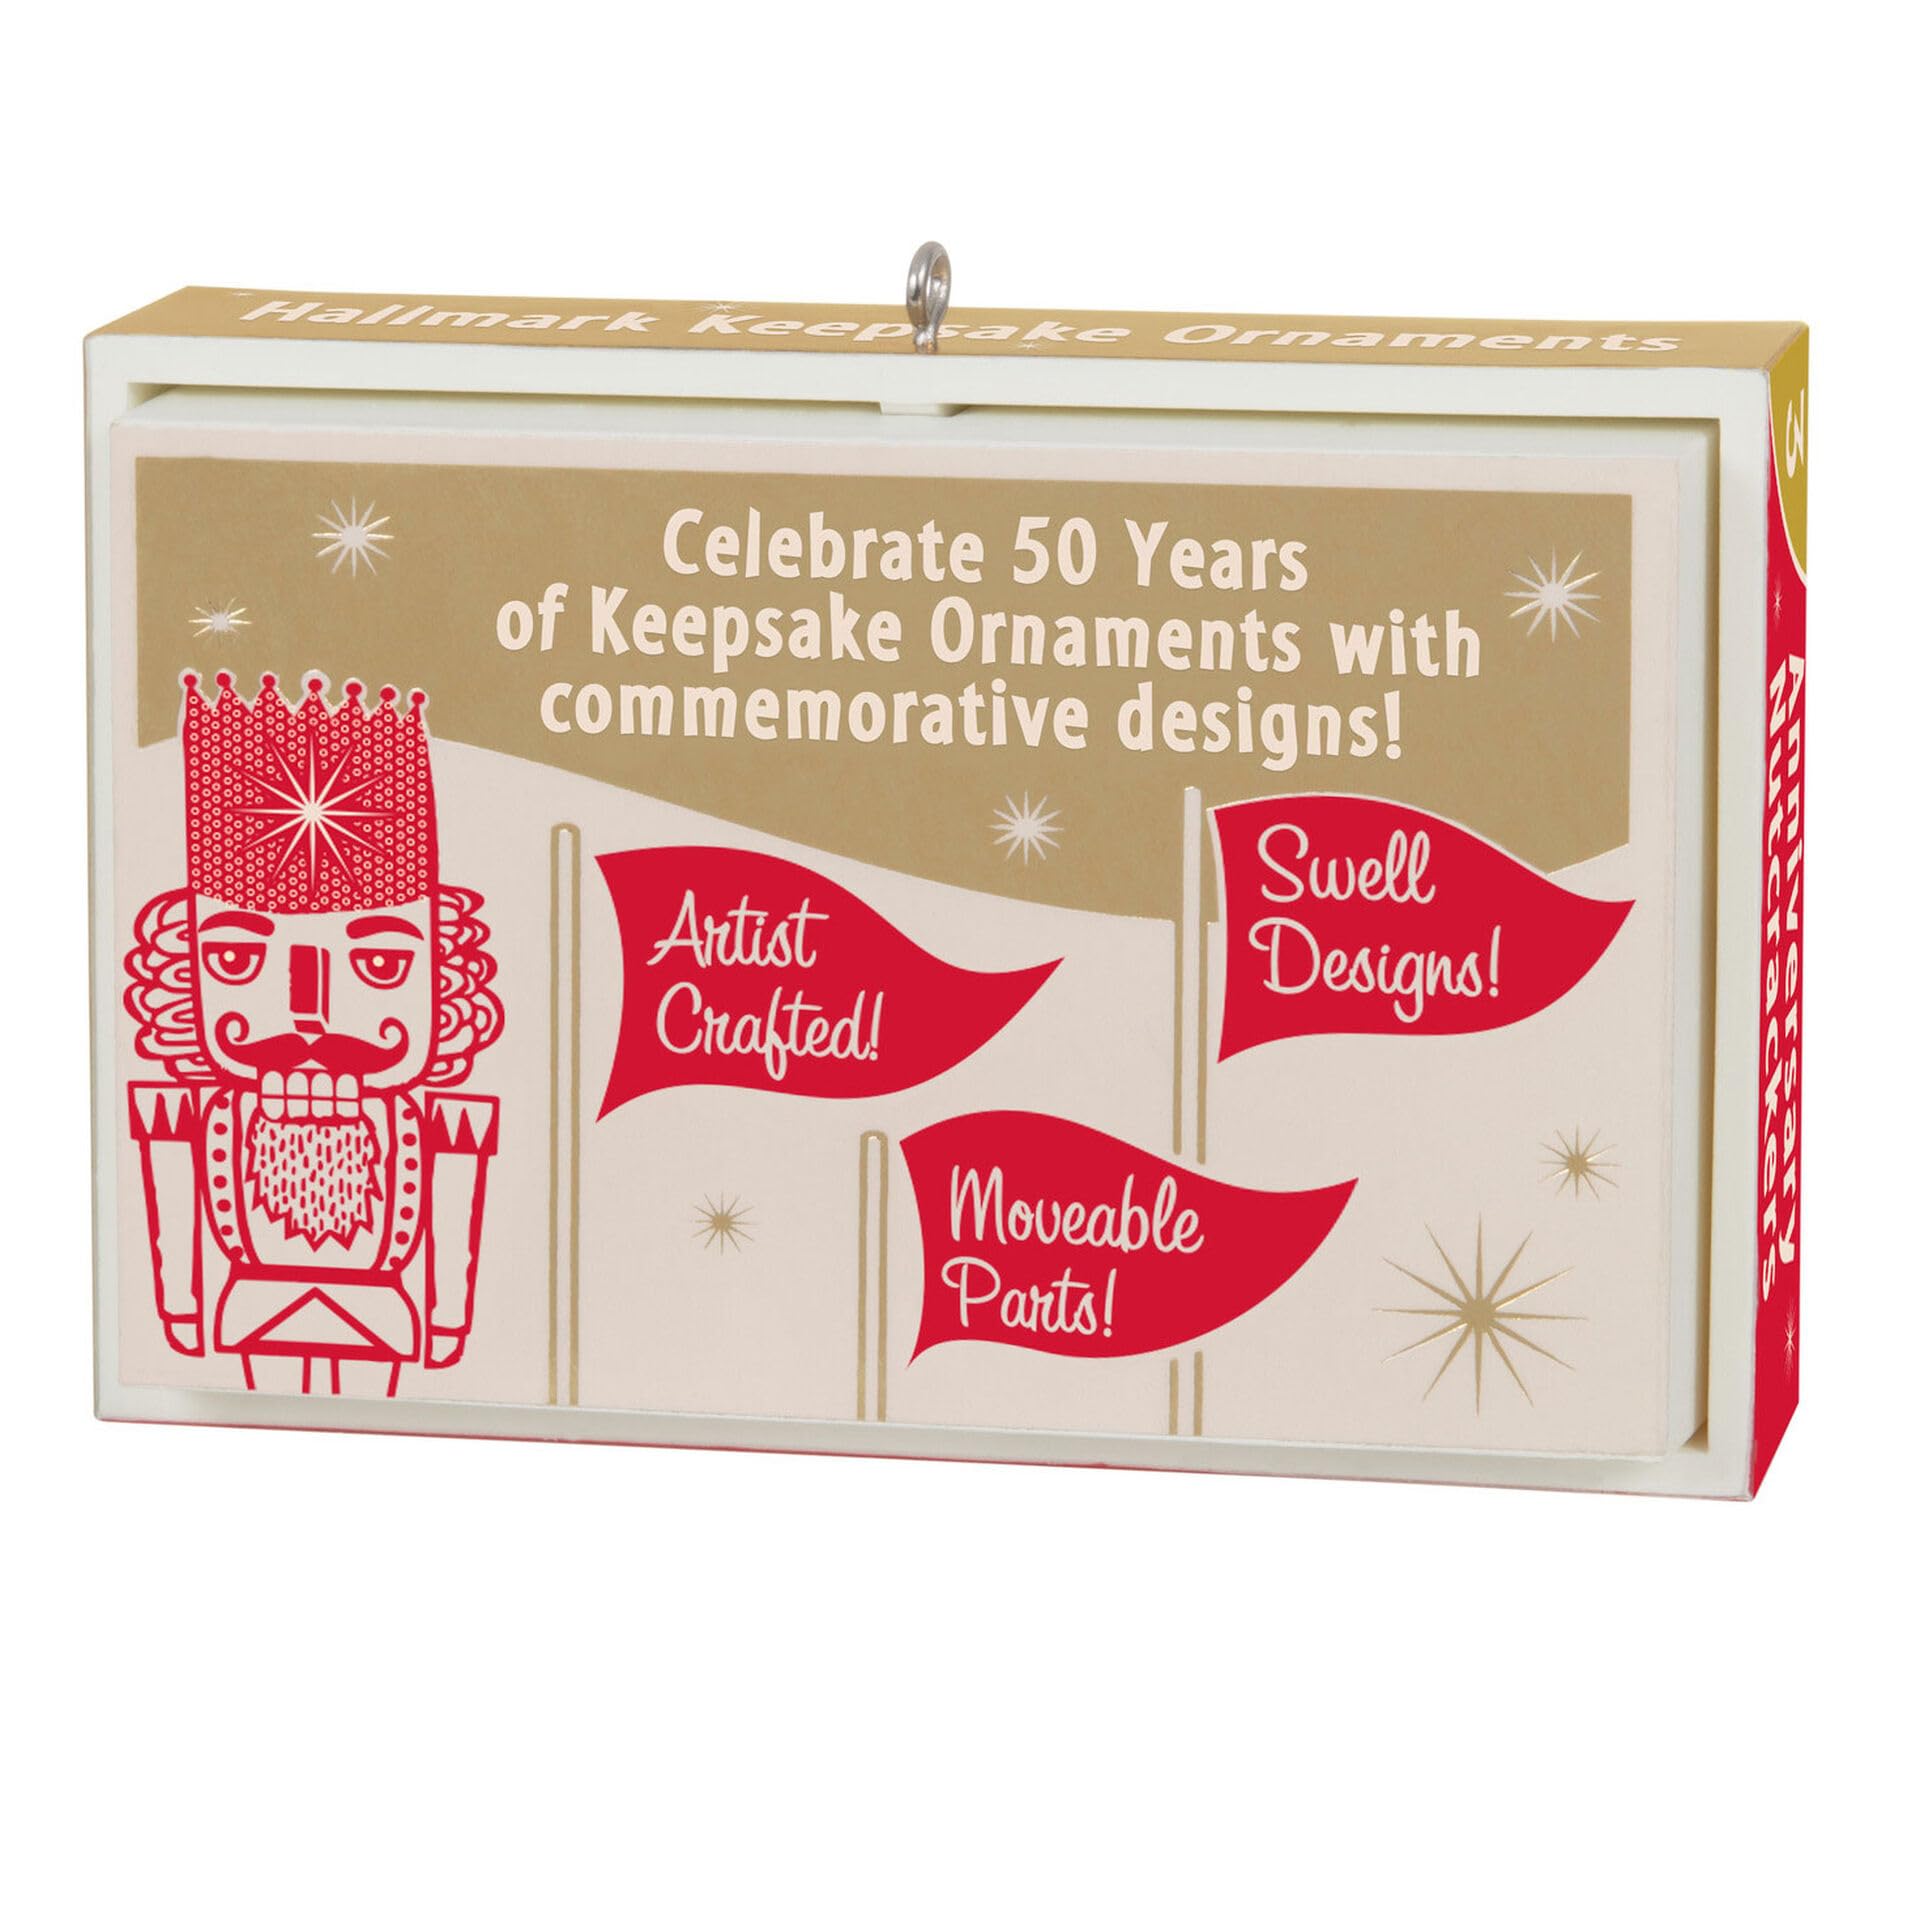 Nifty Fifties Keepsake Ornaments Special Edition Ornament - 2023 Limited Edition